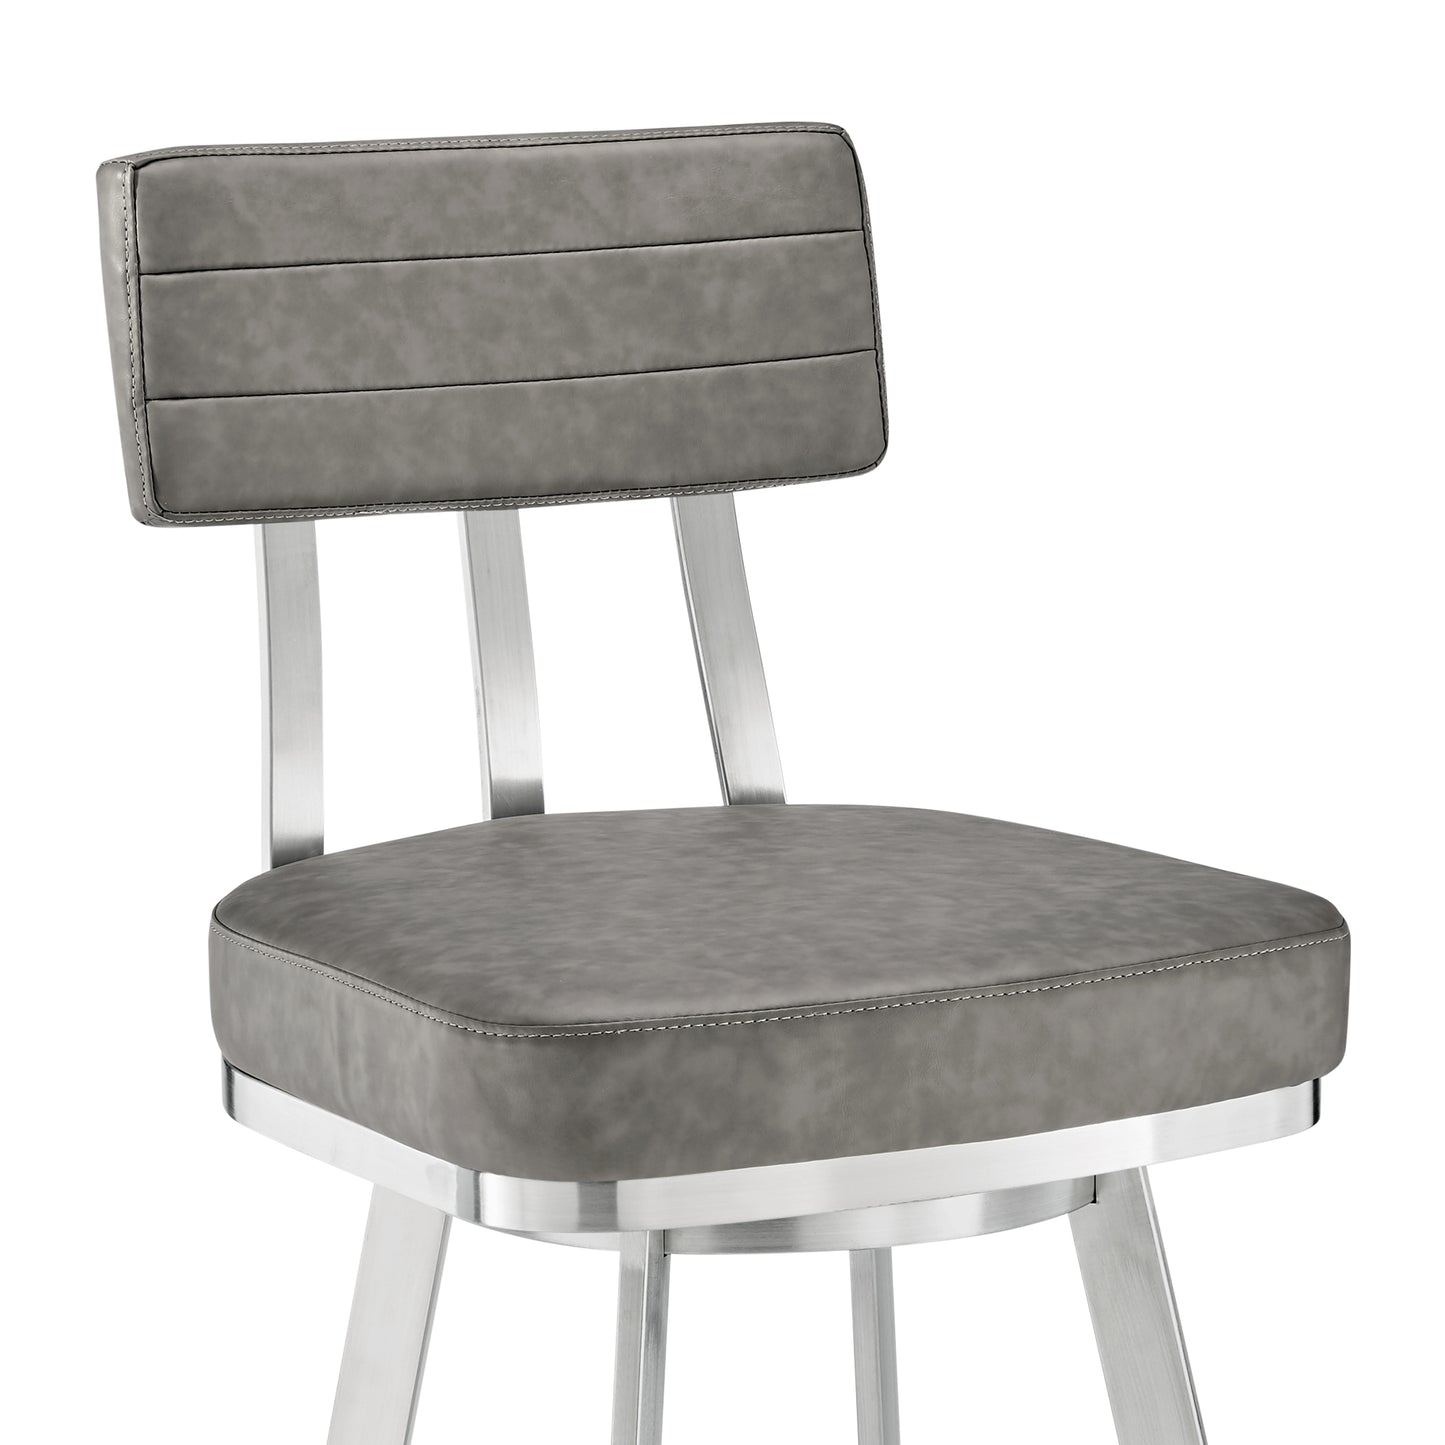 Benjamin 26" Swivel Counter Stool in Brushed Stainless Steel with Gray Faux Leather